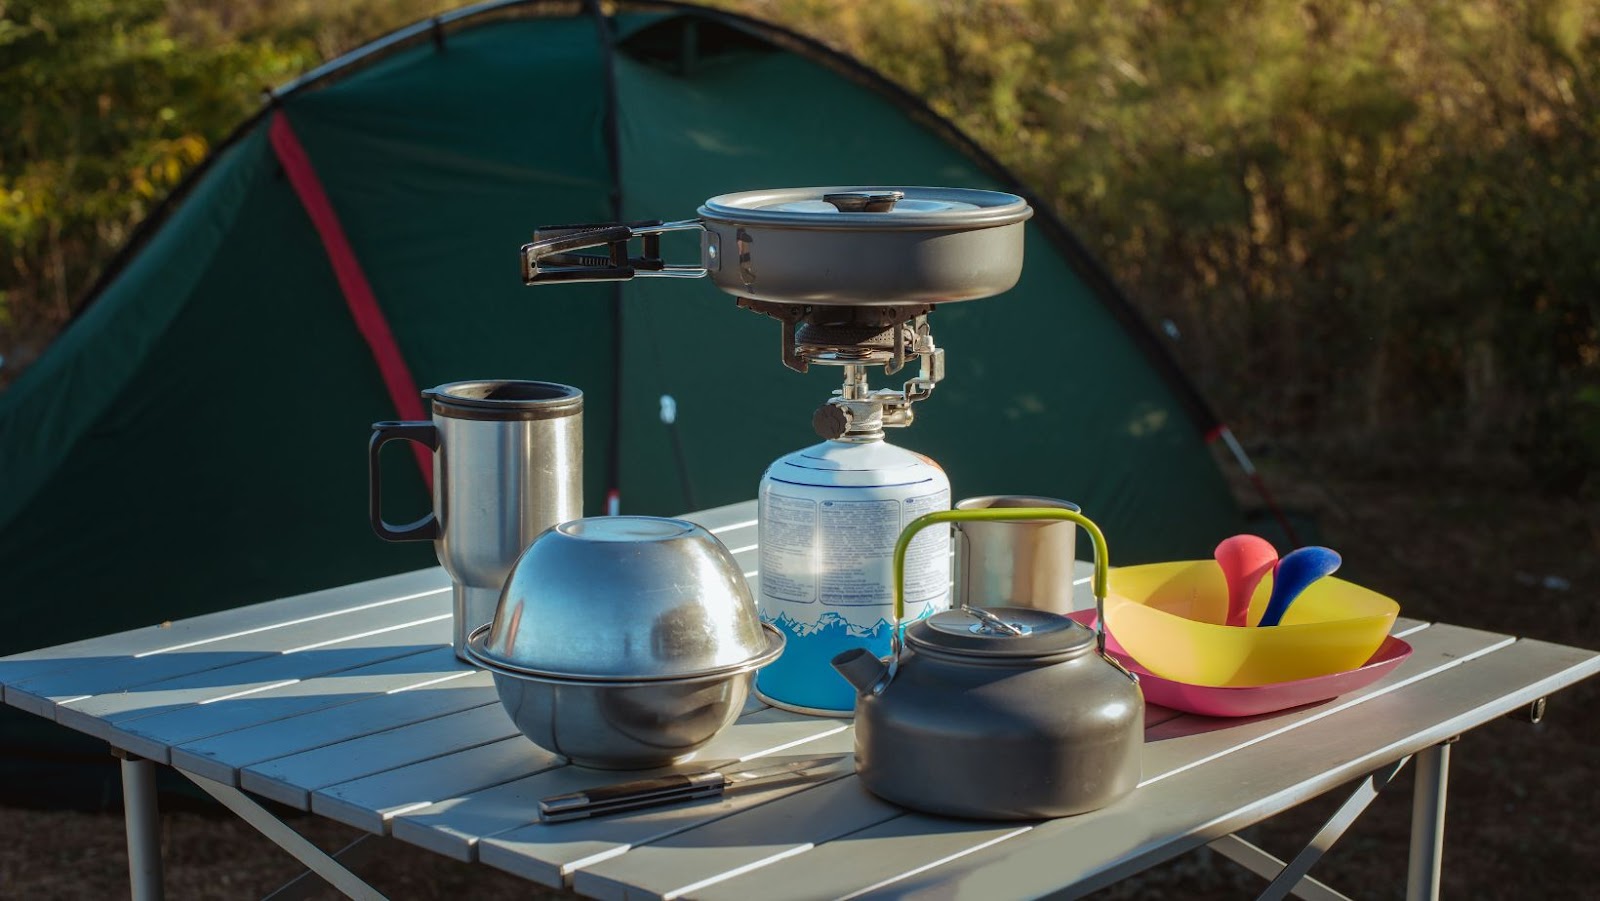 Vital Tips To Make Your Camping Trip More Comfortable And Safer